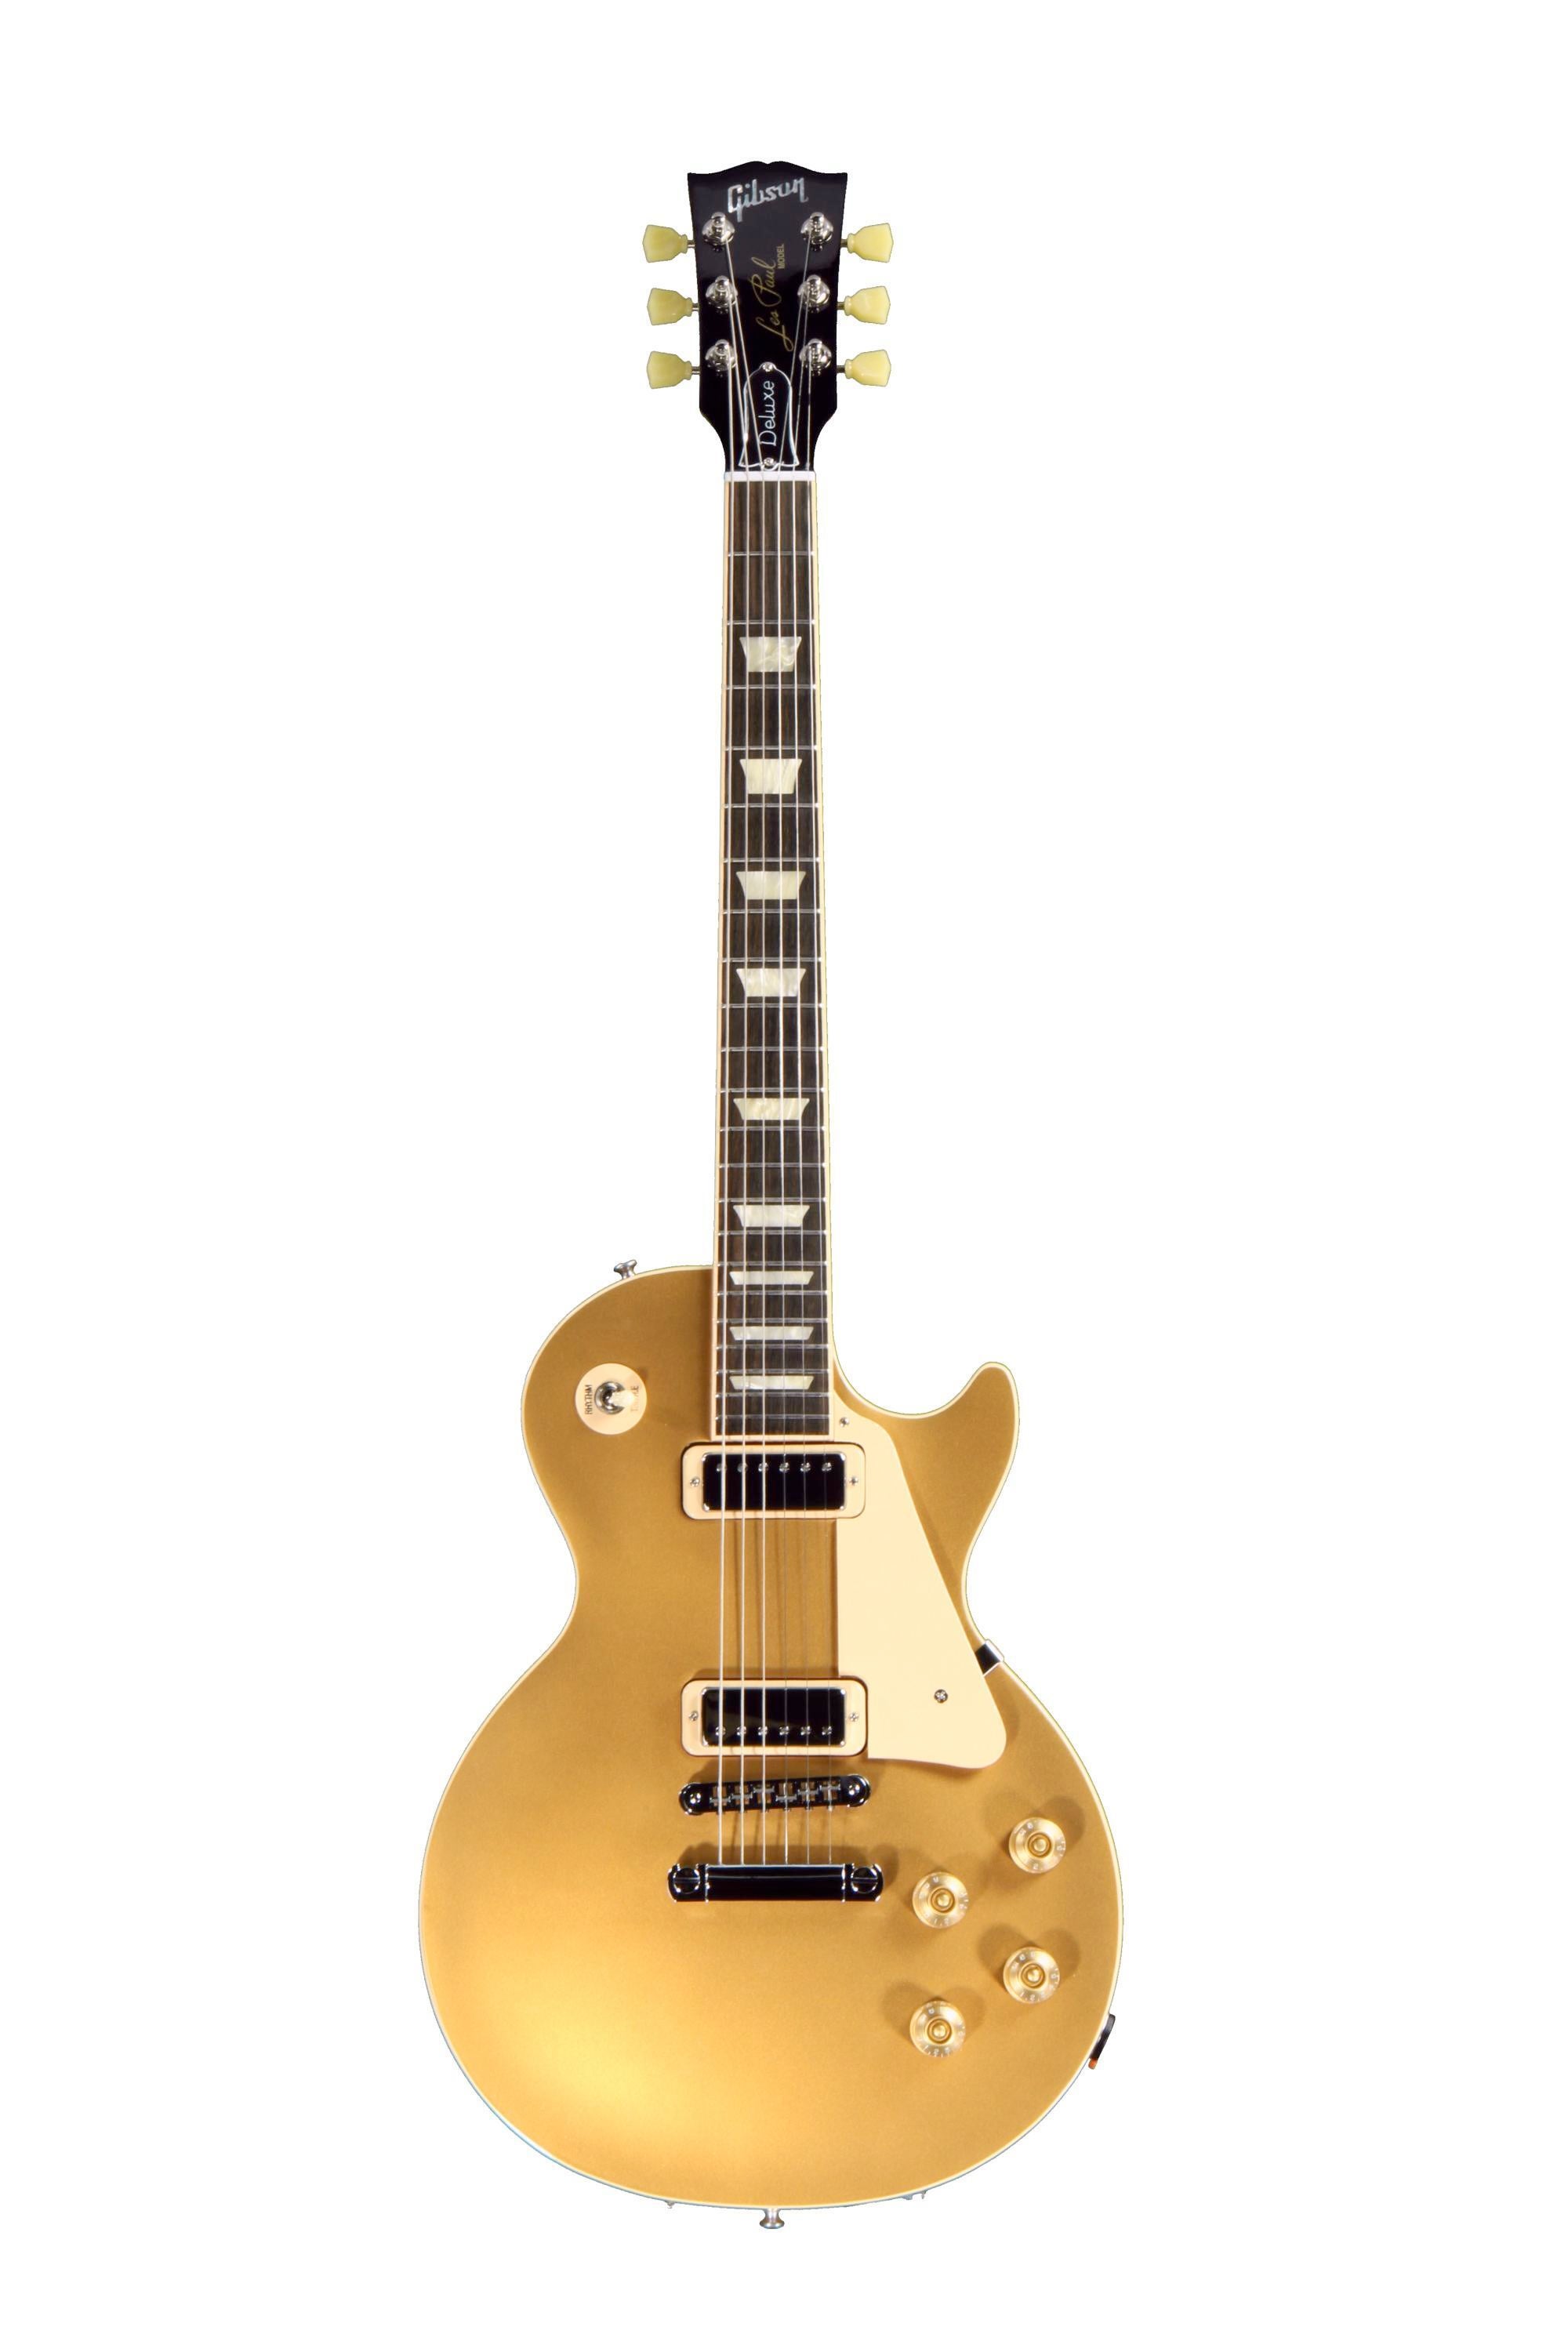 Gibson Les Paul Deluxe Gold Top